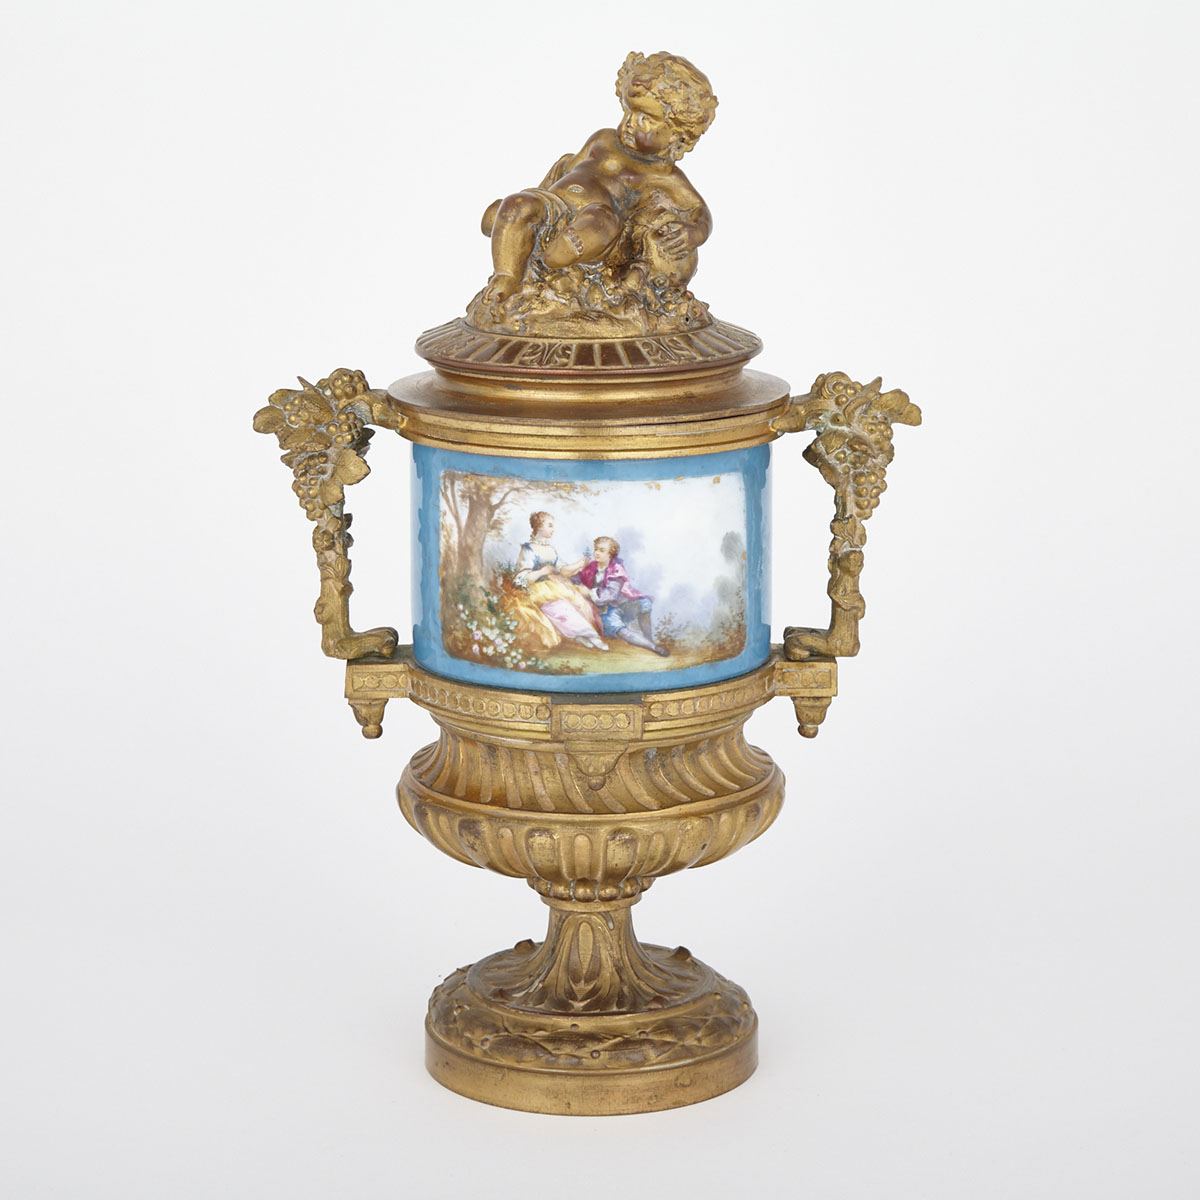 ‘Sèvres’ Porcelain Mounted Ormolu Vase and Cover, late 19th century